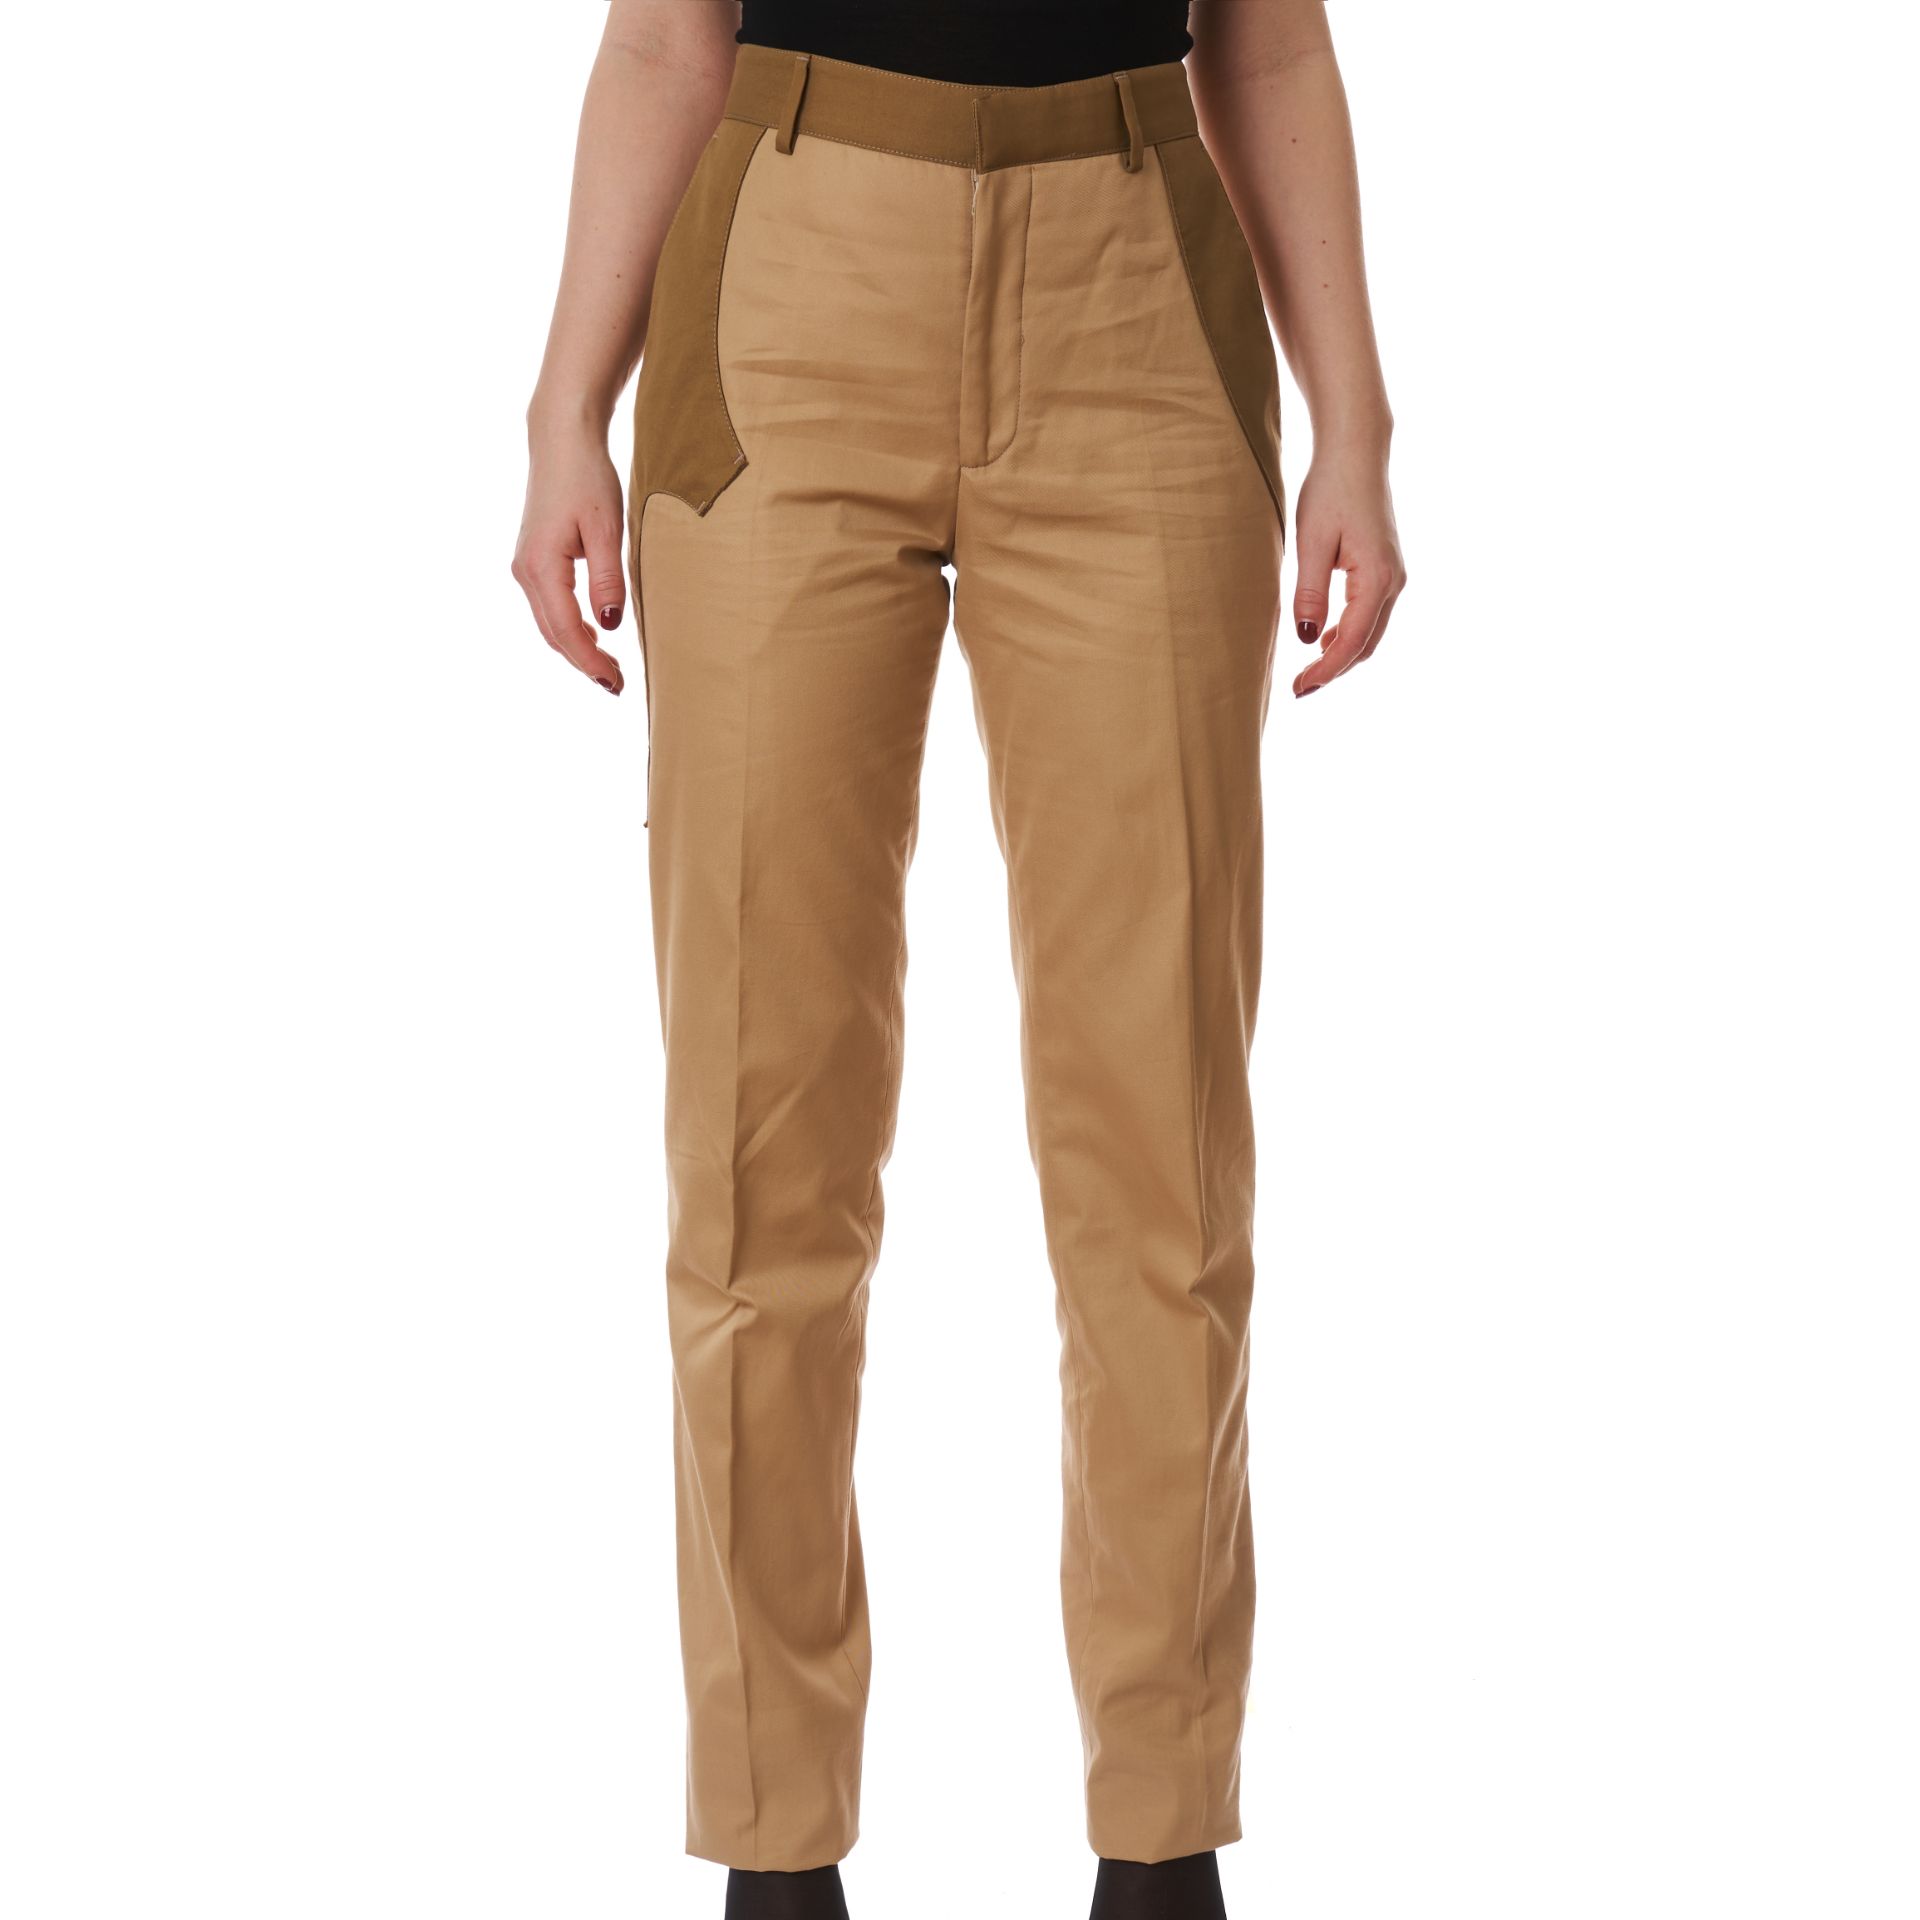 NO RESERVE ALEXANDER MCQUEEN TWO TONE BEIGE TROUSERS - Image 2 of 3